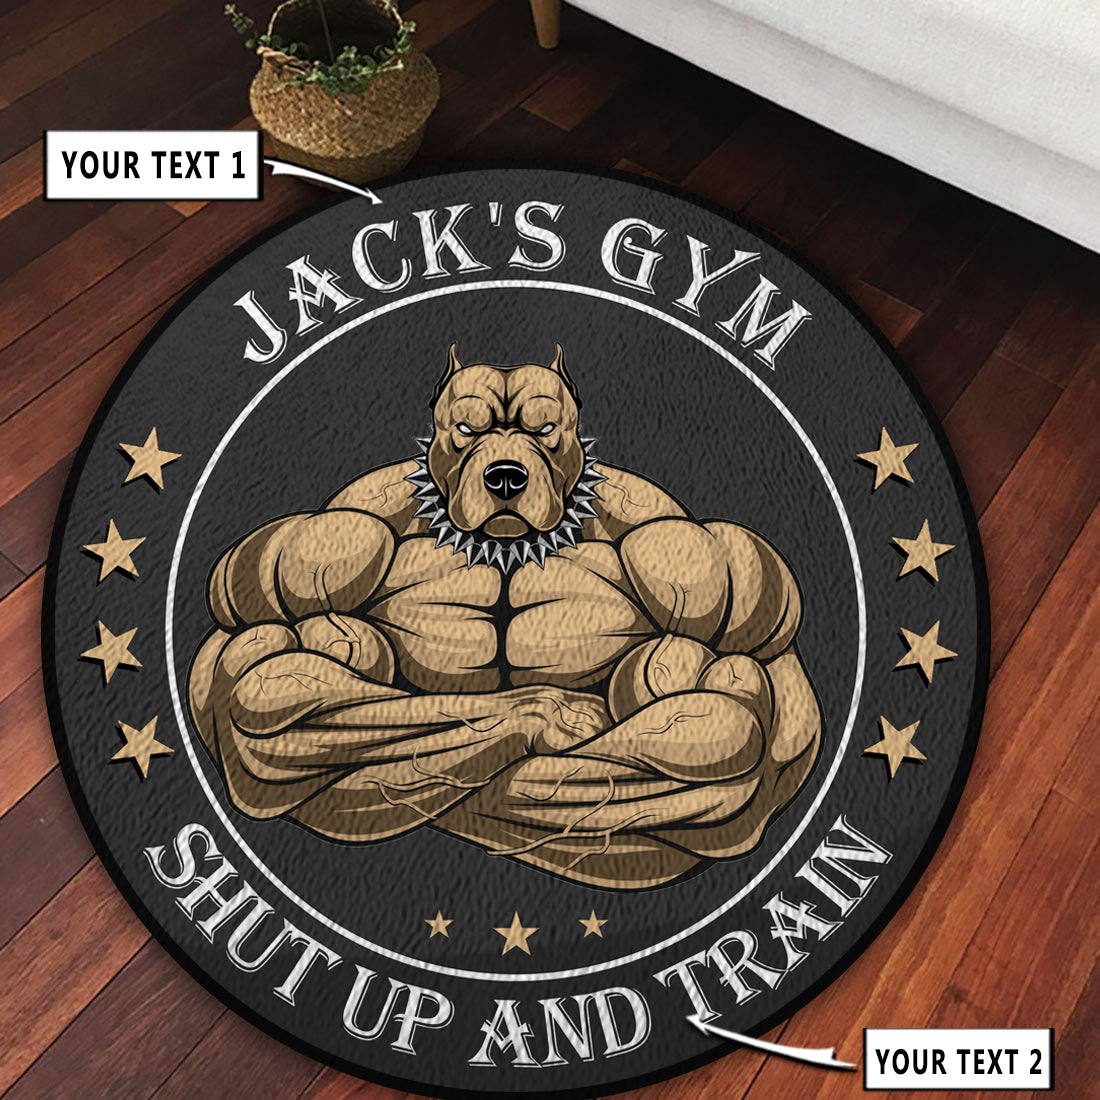 Personalized Home Gym Decor Muscle Strong Pitbull Round Rug, Carpet